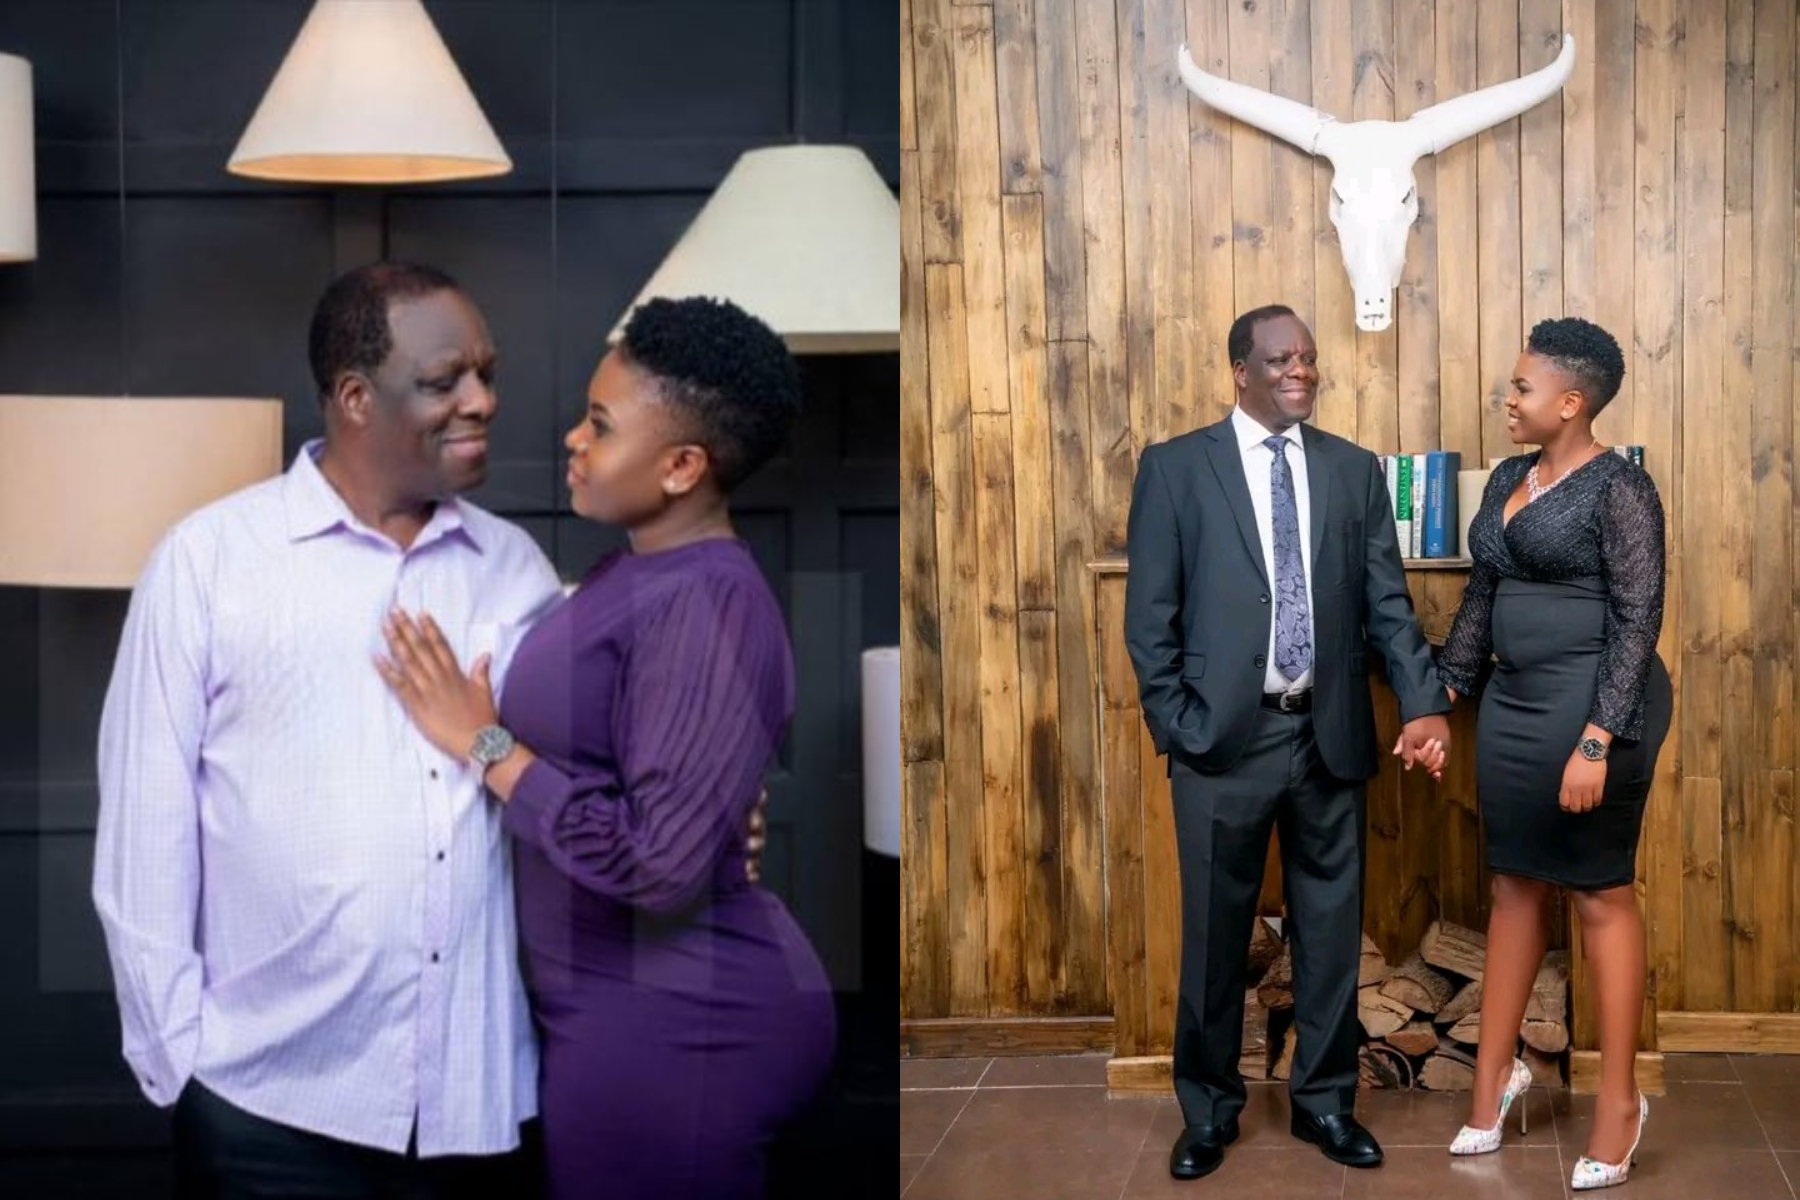 A composite photo of Wycliffe Oparanya and his alleged lover.